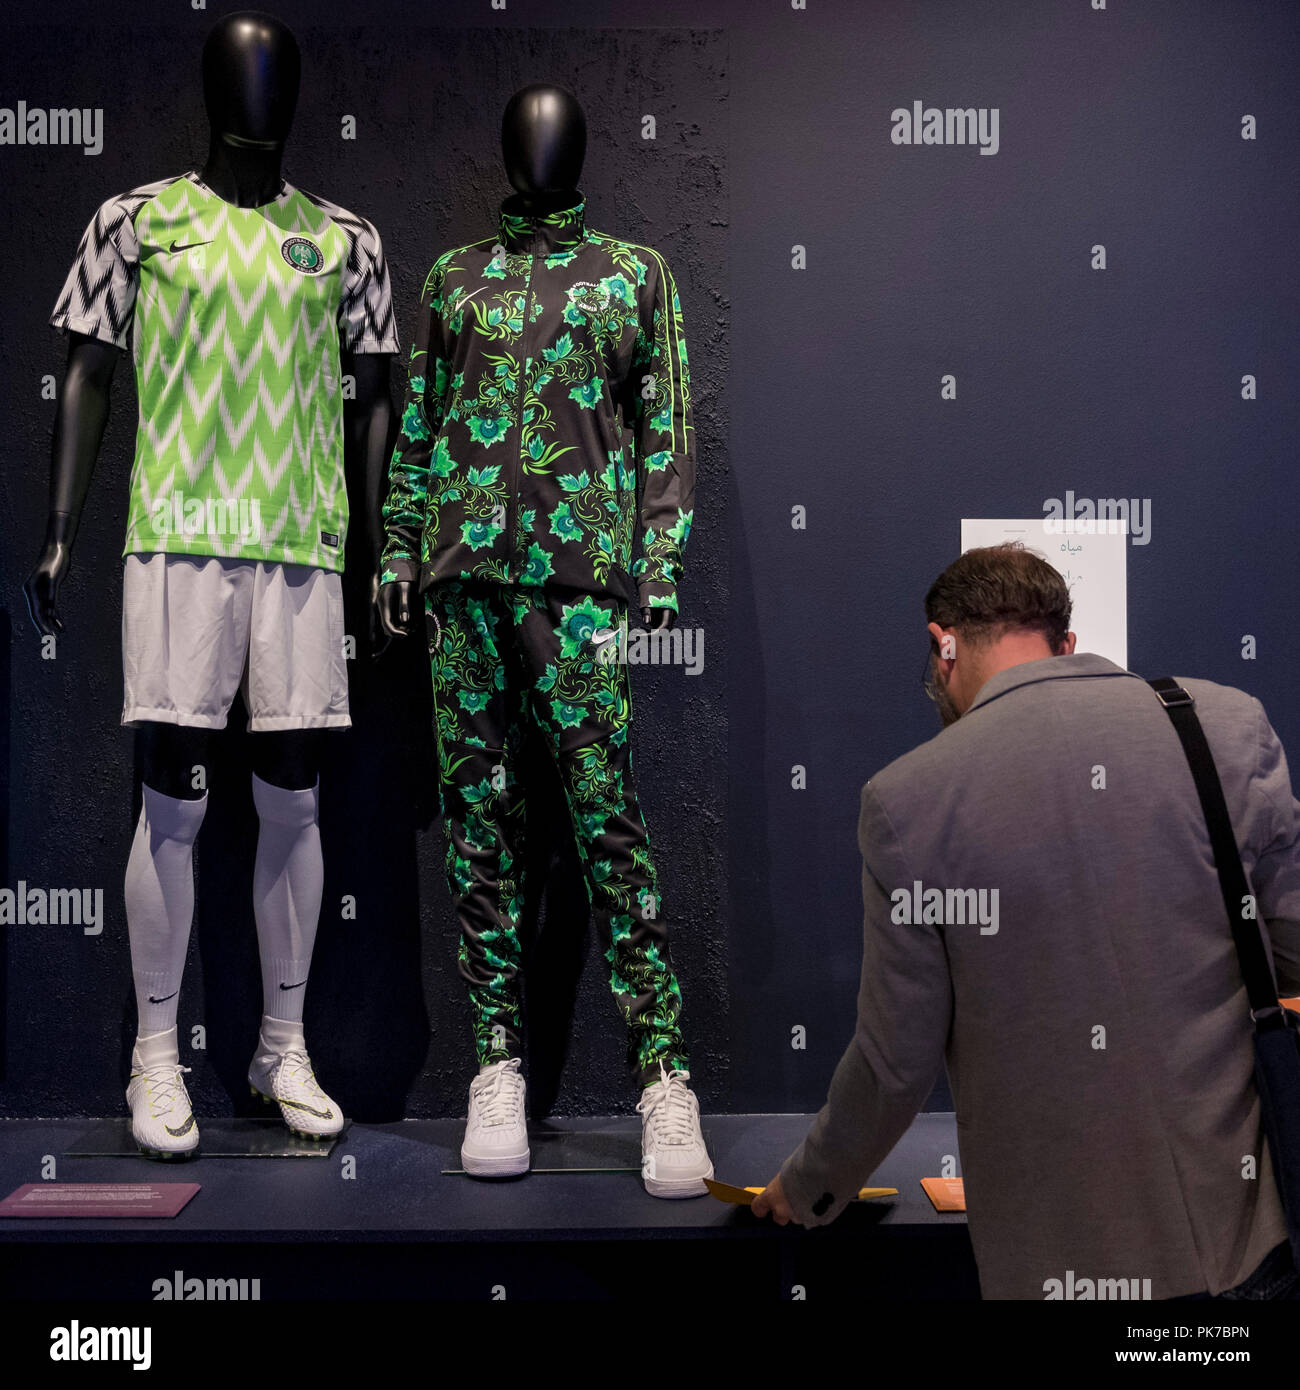 London, UK.  11 September 2018.  'Nigeria National Football Team: National Team Collection', designed by Nike, team shirts for the 2018 World Cup, at the preview of the 87 nominees for the eleventh Beazley Designs of the Year exhibition and awards at the Design Museum in Kensington.  The exhibition runs 12 September to 6 January 2019 and celebrates the most innovative designs of the last year.  Credit: Stephen Chung / Alamy Live News Stock Photo